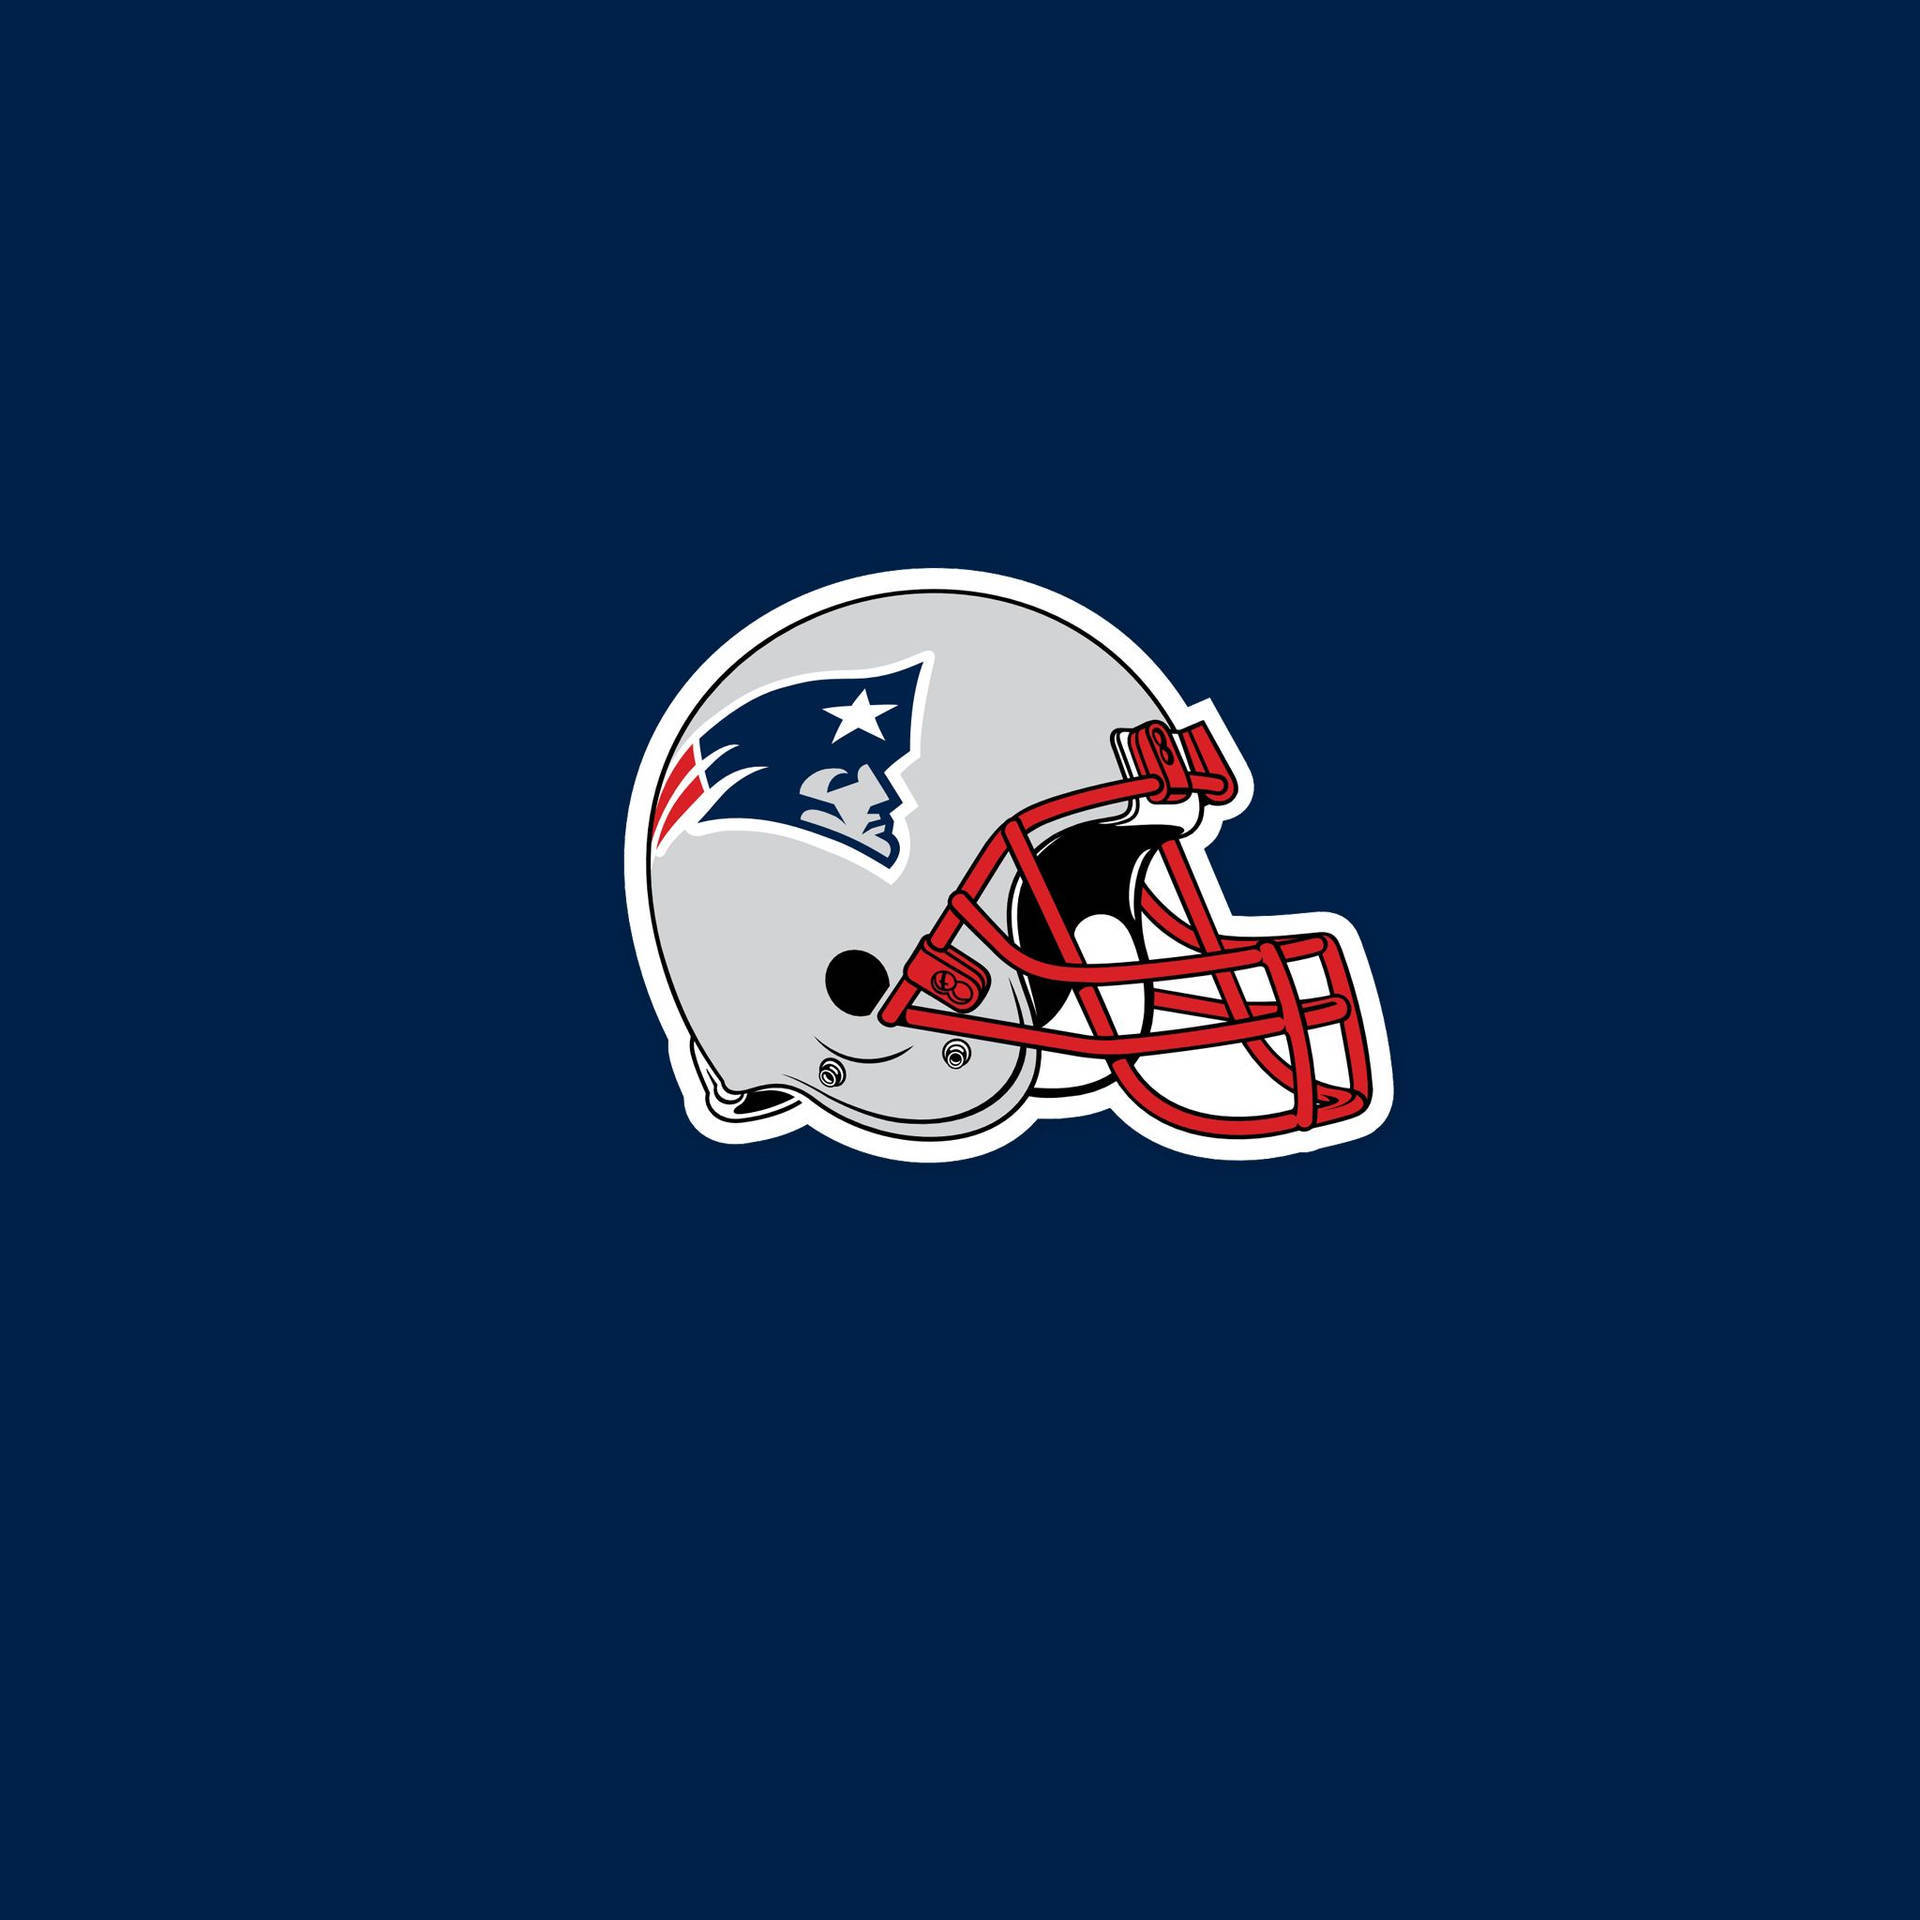 Proud, Loyal and United — The Patriot spirit. Wallpaper